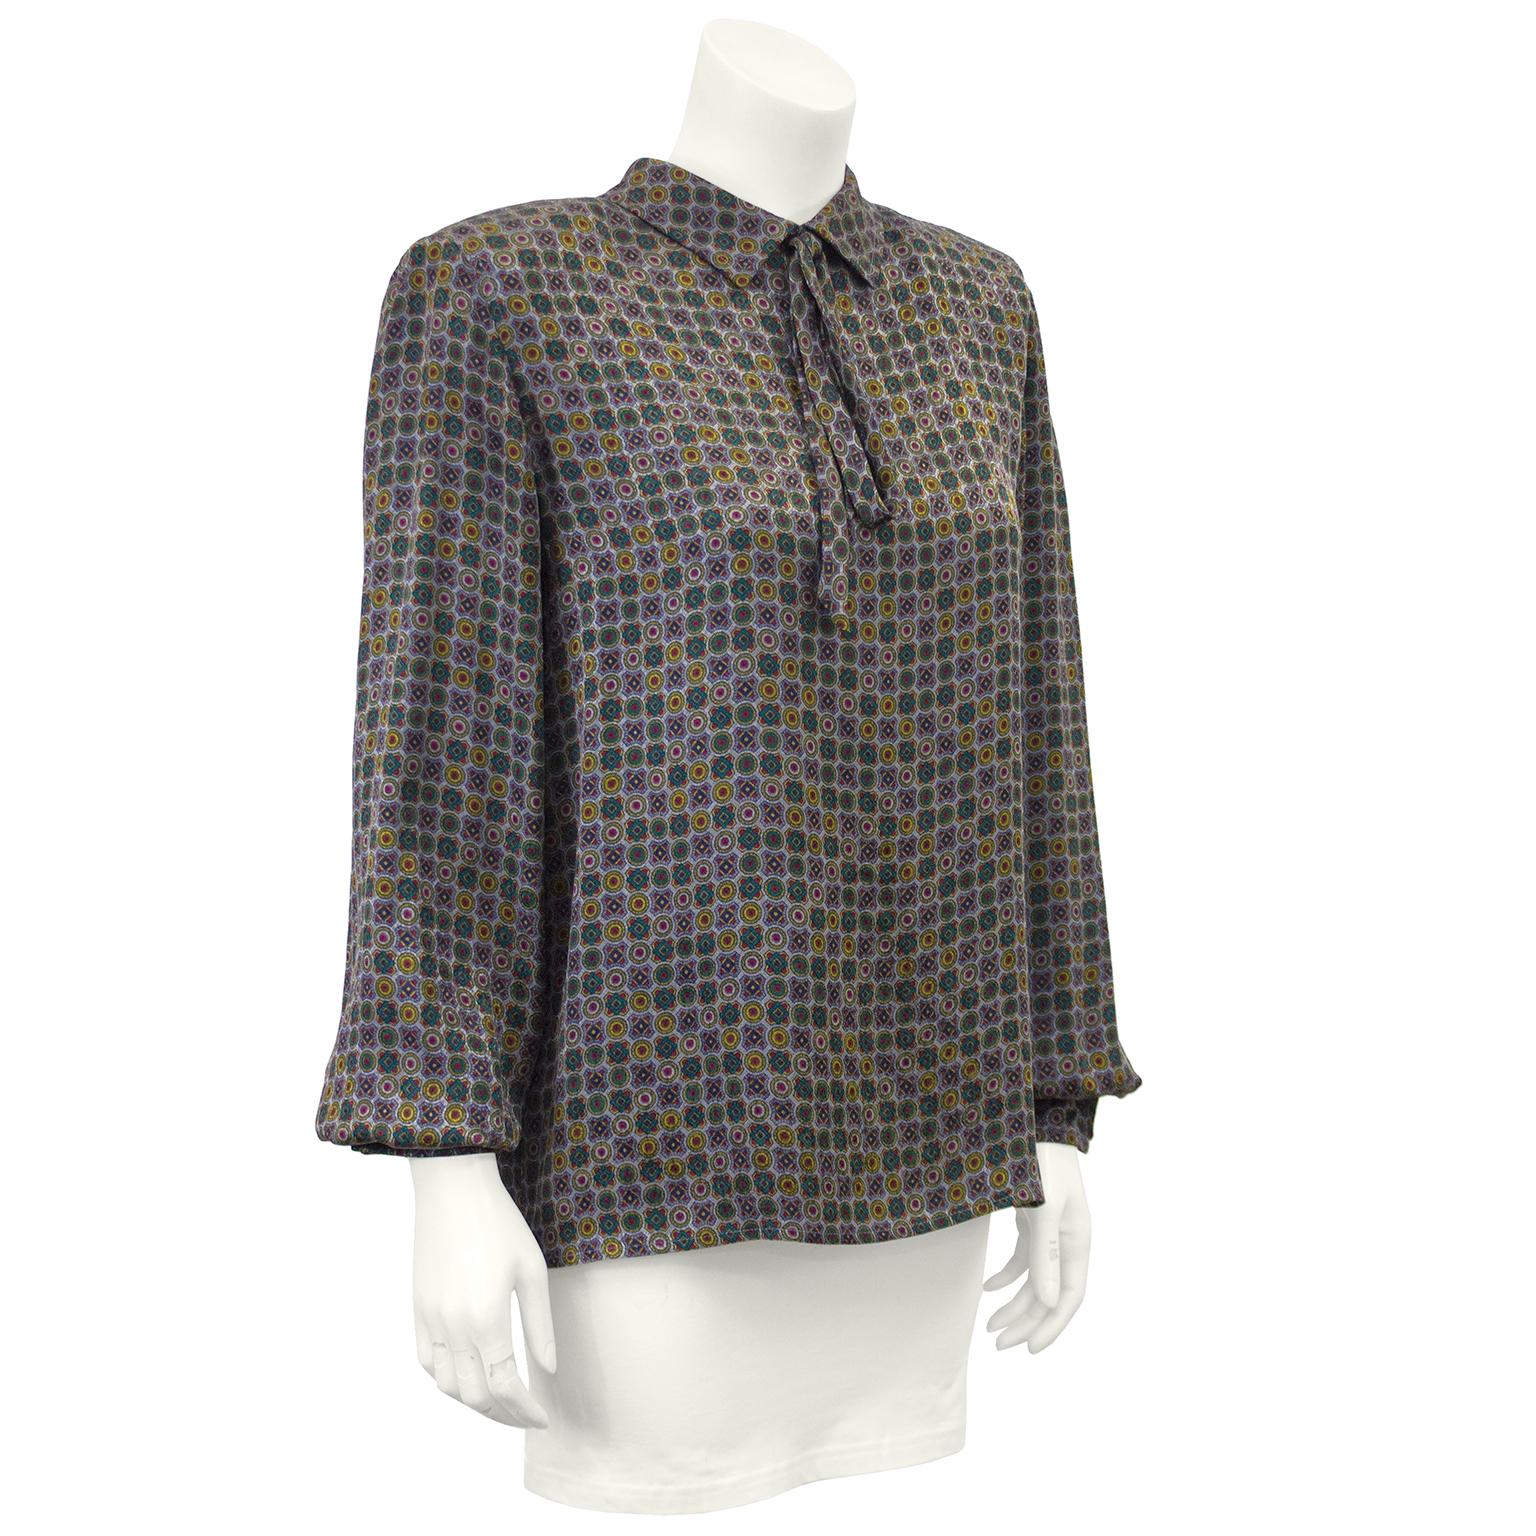 This 1970s Valentino silk blouse features an all over jewel tone pattern on a blue grey background. The petite pointed collar has a fixed loose, long bow at the front and fastens up the back with buttons hidden under a placket and hooks at the nape